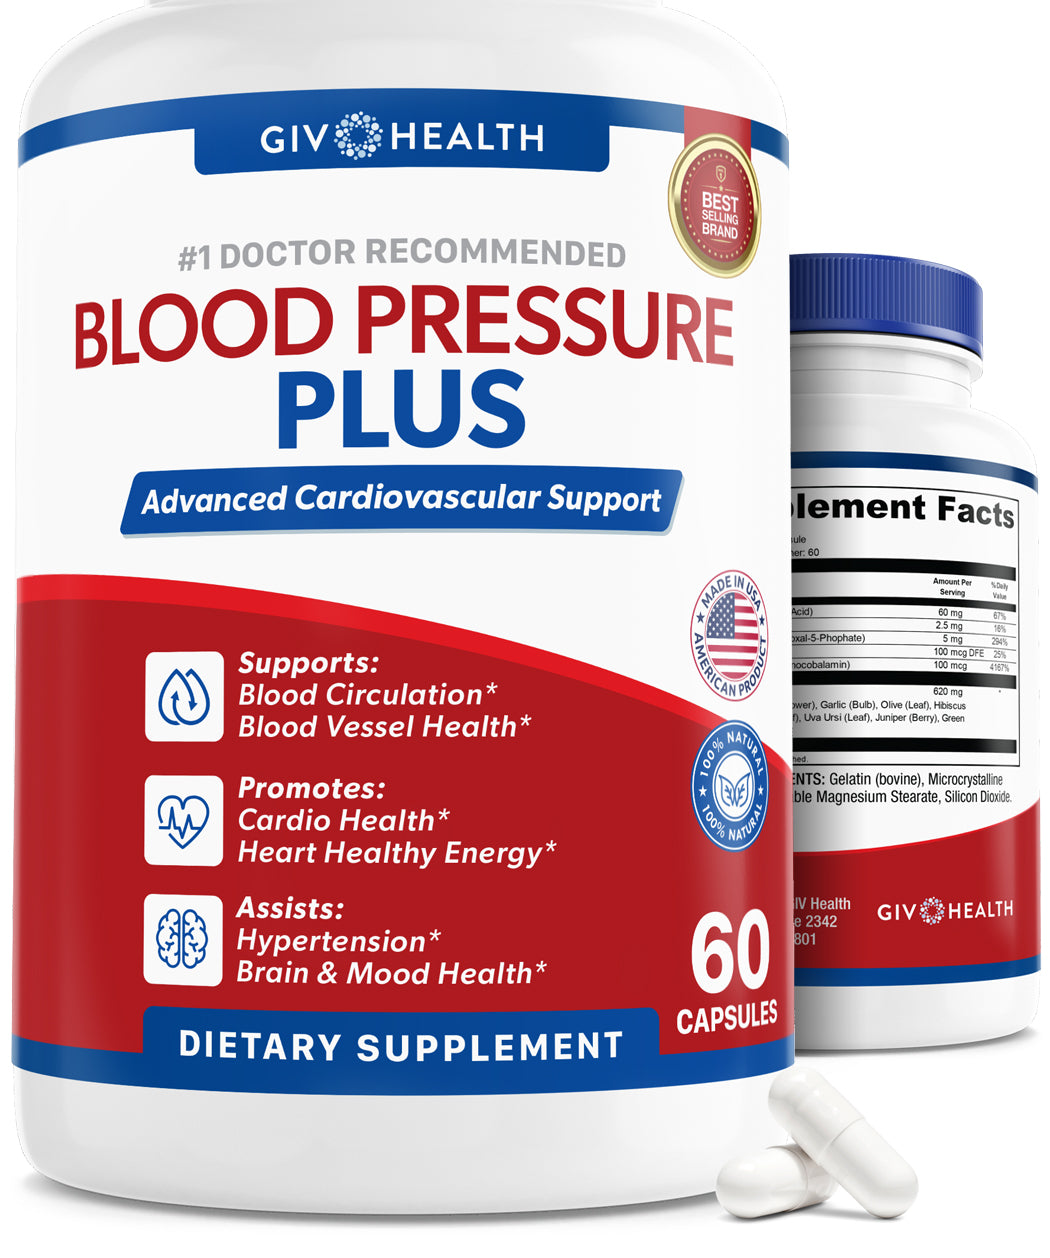 Lower Hypertension  Support Cardiovascular Health  Improve Blood Pressure. Vitamin C, B6, B12 with Niacin and Folate. Made in the USA